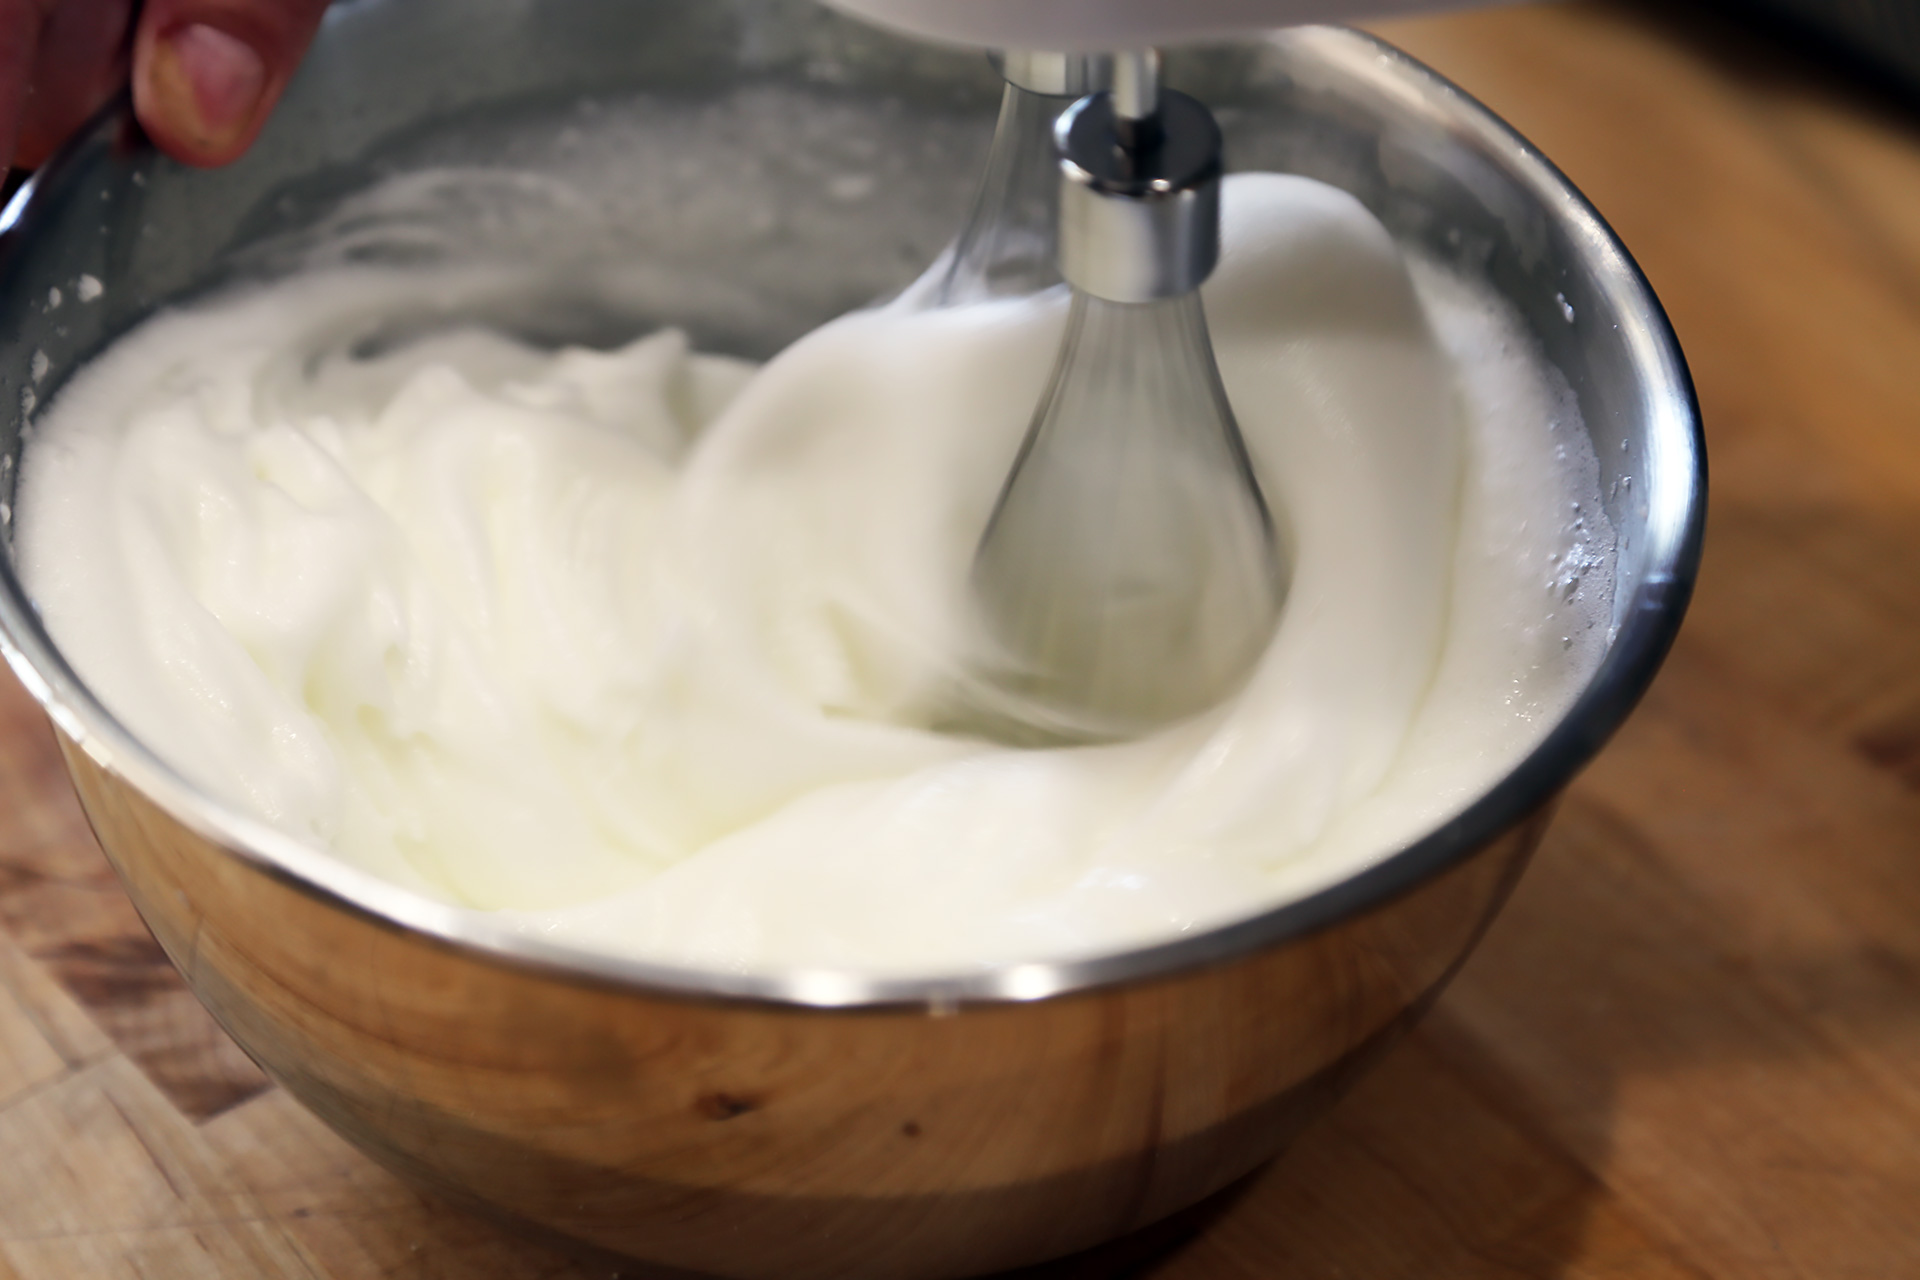 In mixing bowl using an electric mixer fitted with the whisk attachment, whip the egg whites to medium-stiff peaks.